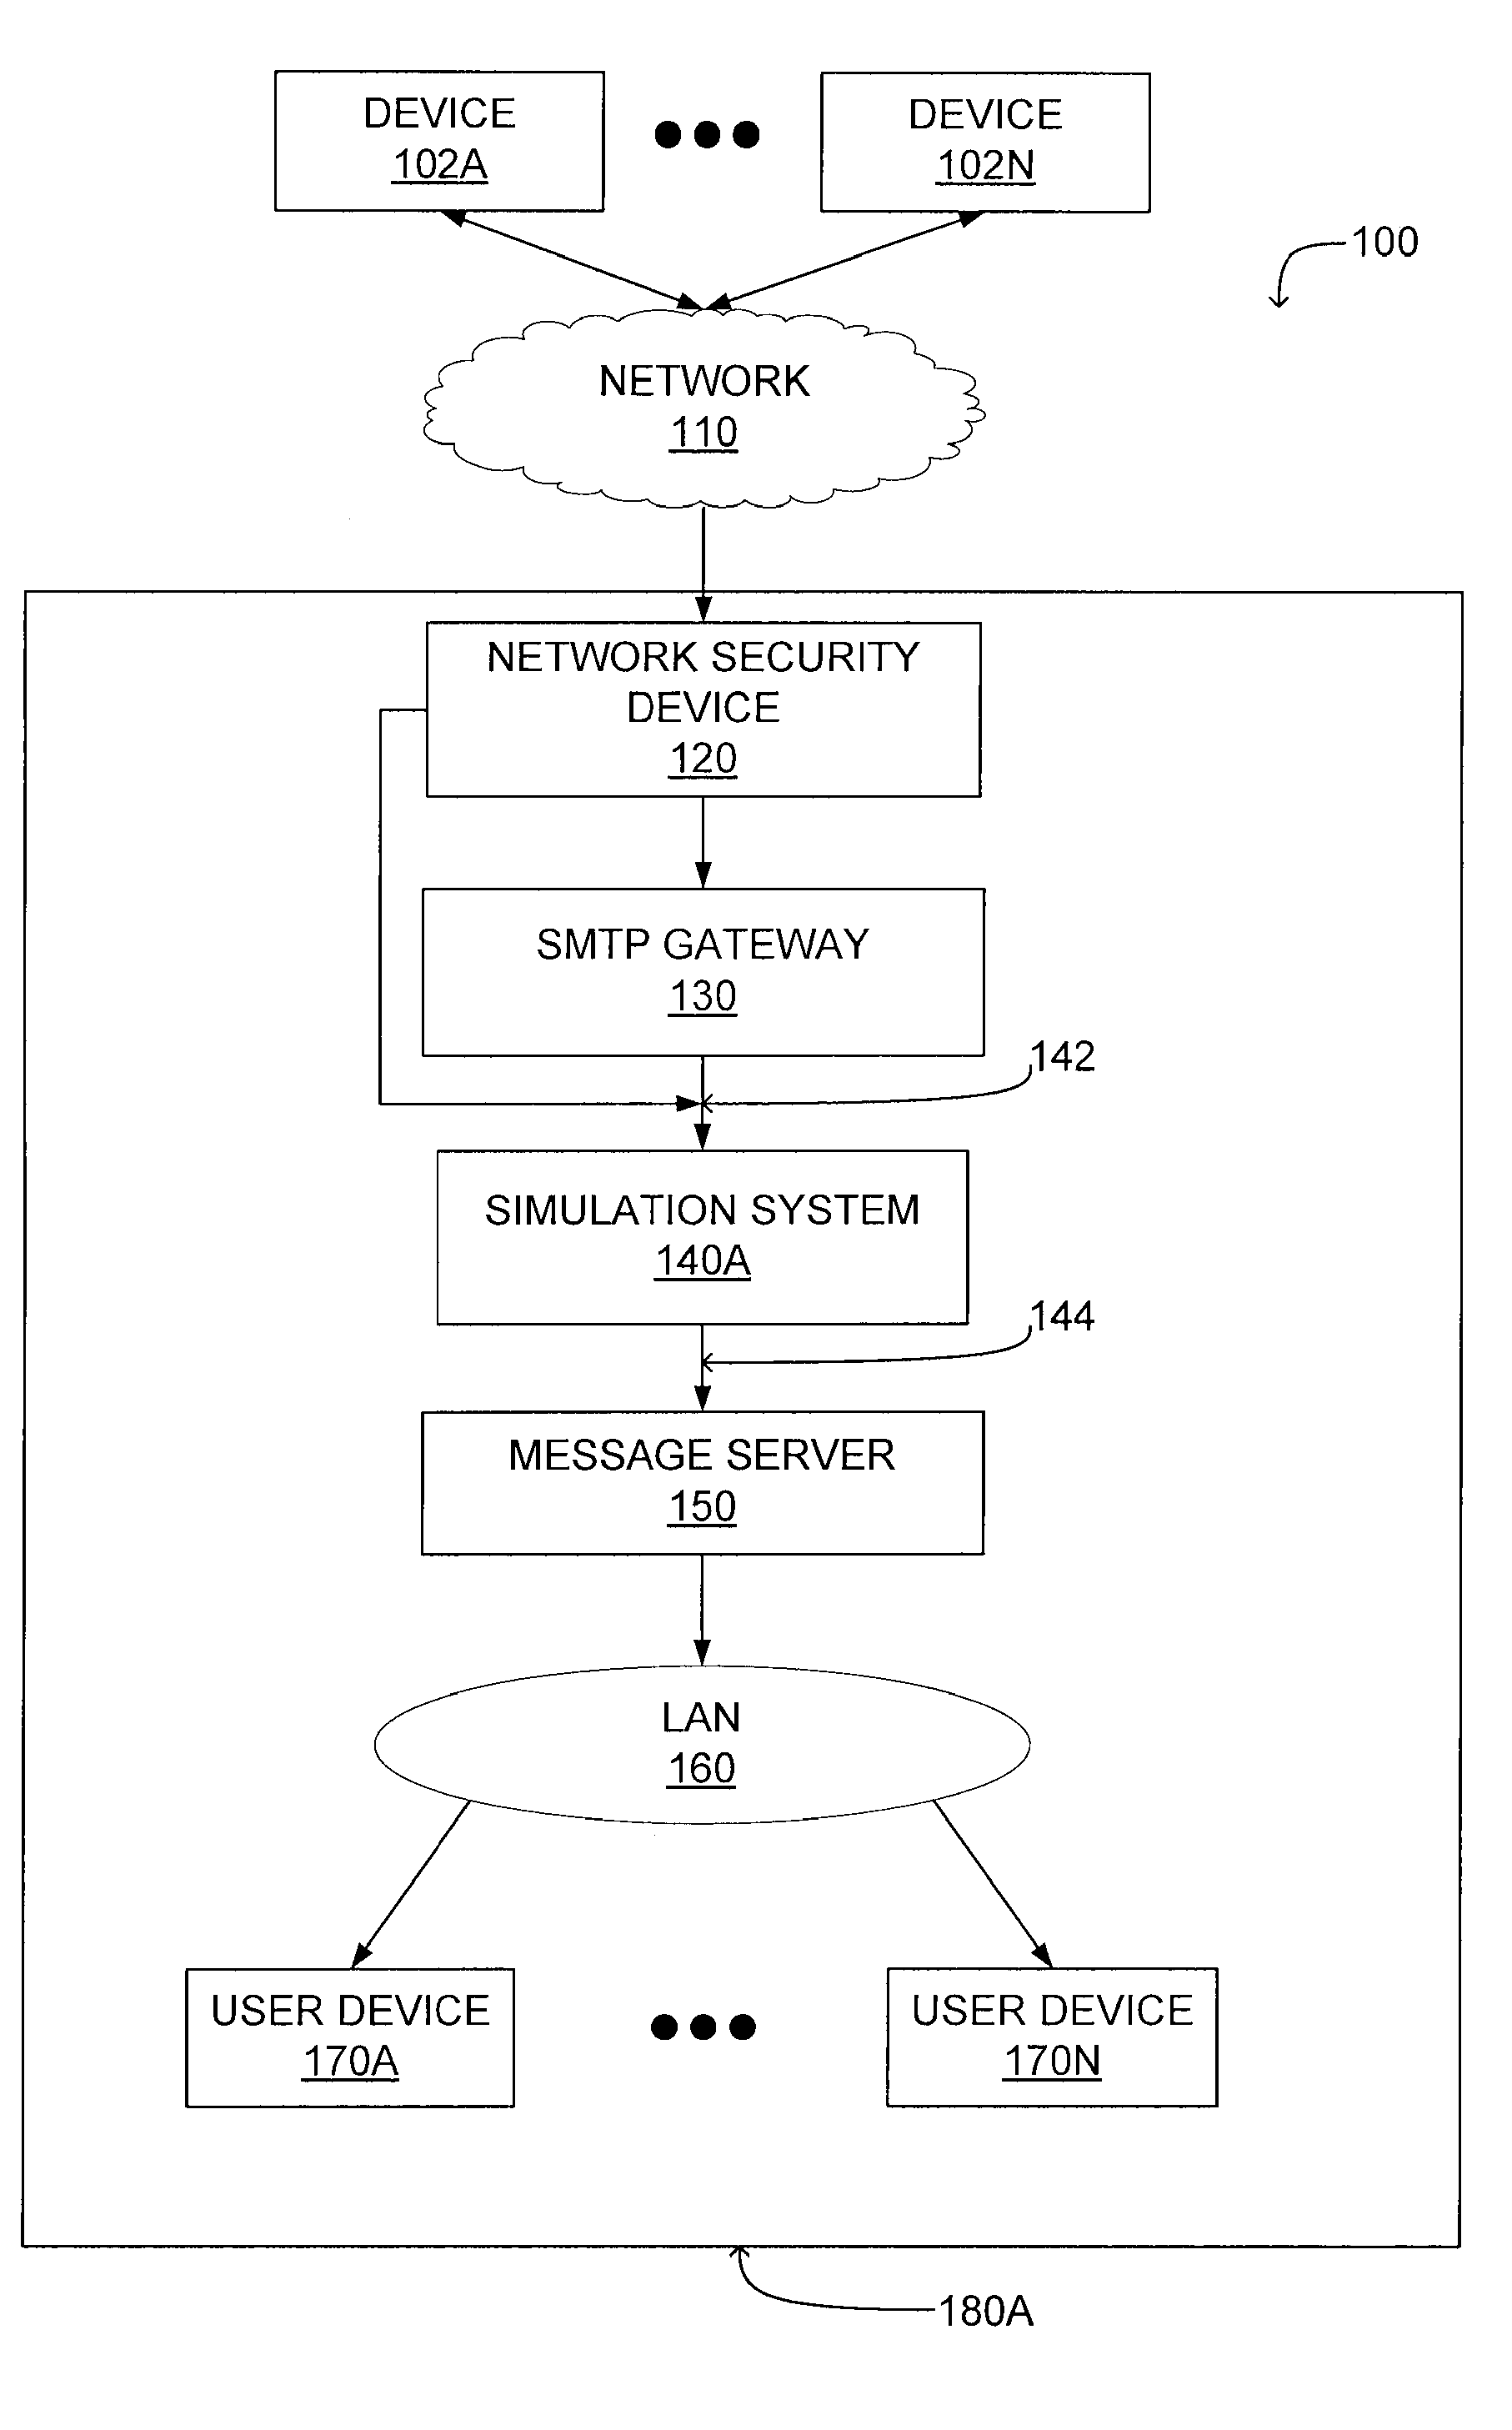 Preventing propagation of malicious software during execution in a virtual machine